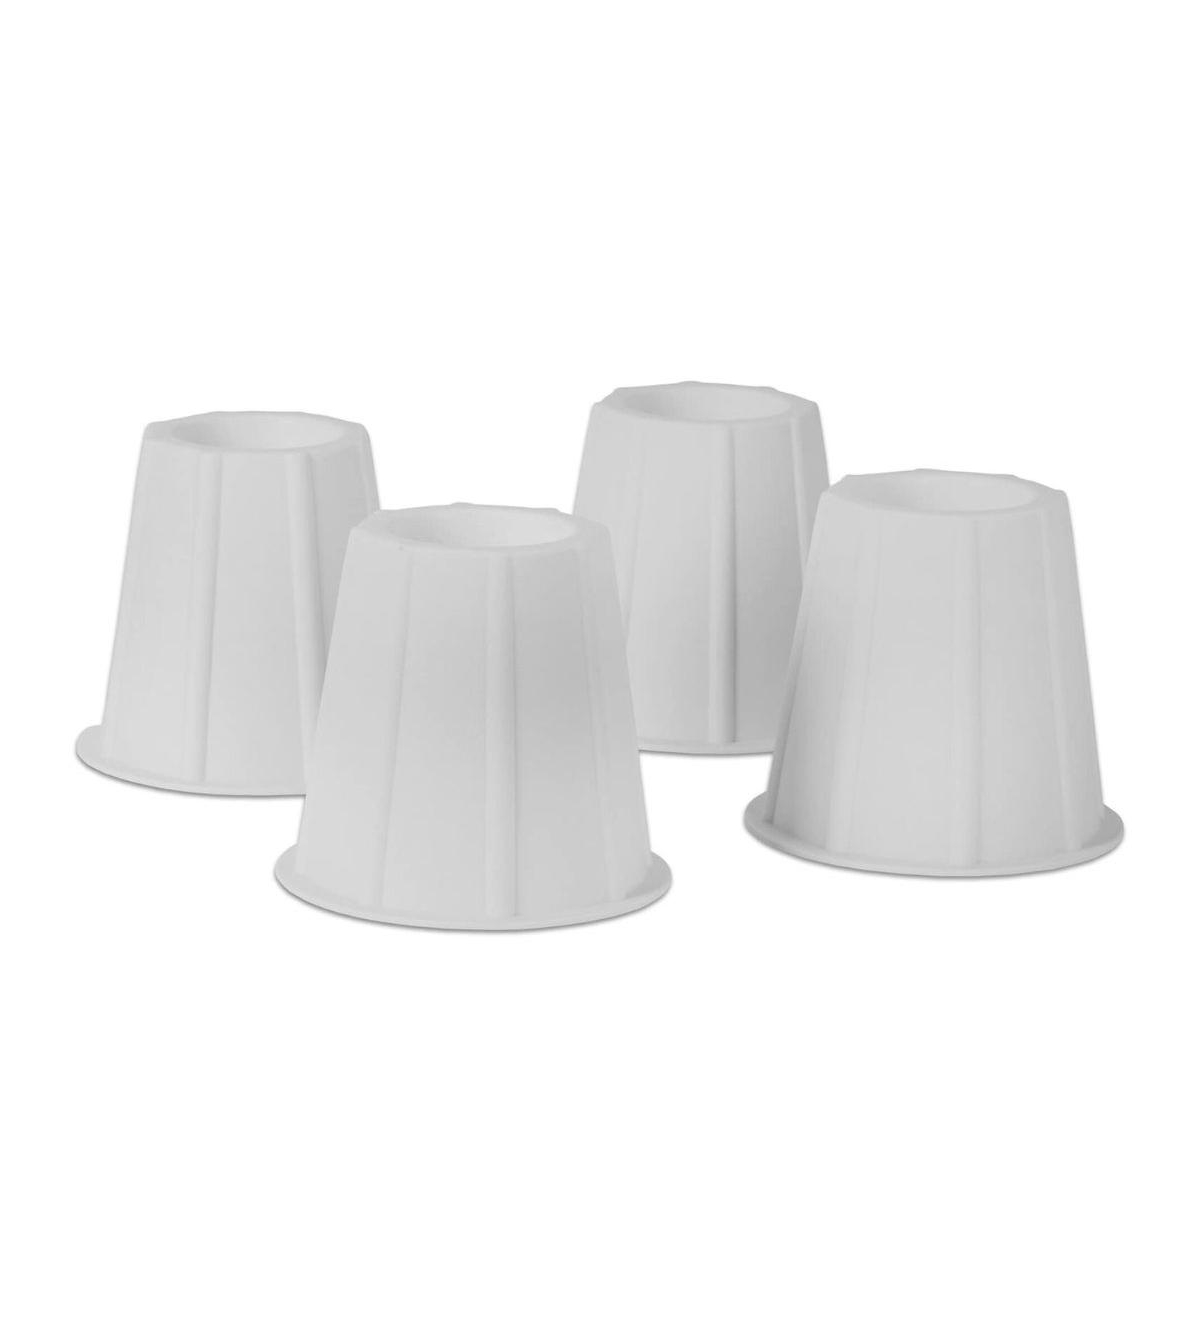 4 Pack Round Bed Risers - Furniture Risers 5 to 6 inches White - Heavy-Duty Furniture Riser for Table, Couch, Desk, and Chair - Open White